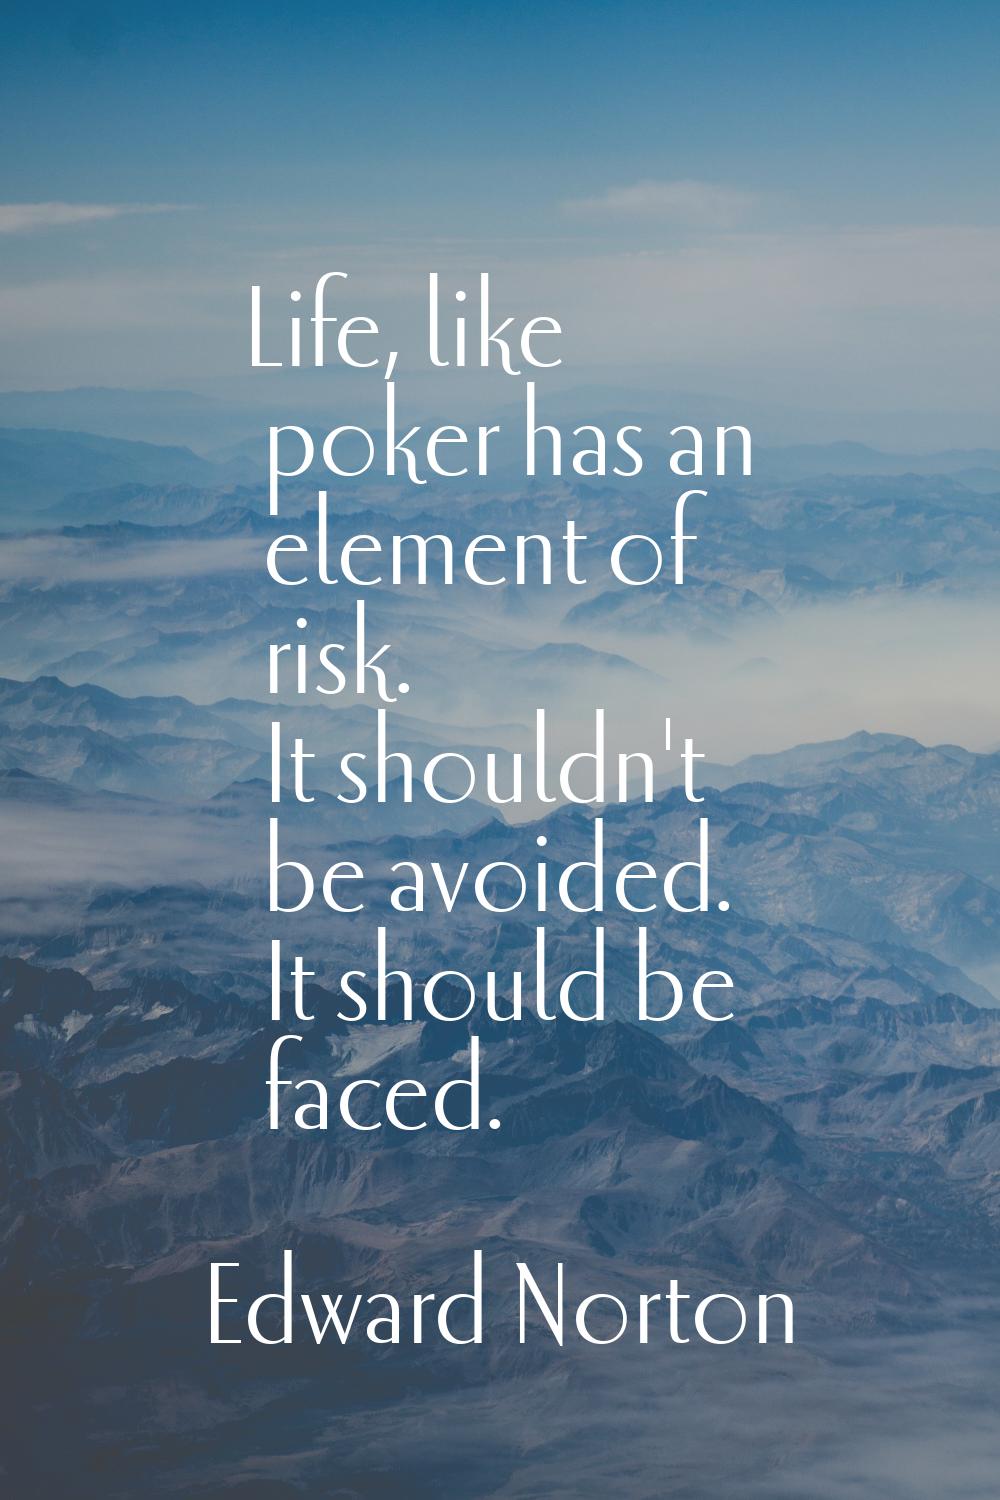 Life, like poker has an element of risk. It shouldn't be avoided. It should be faced.